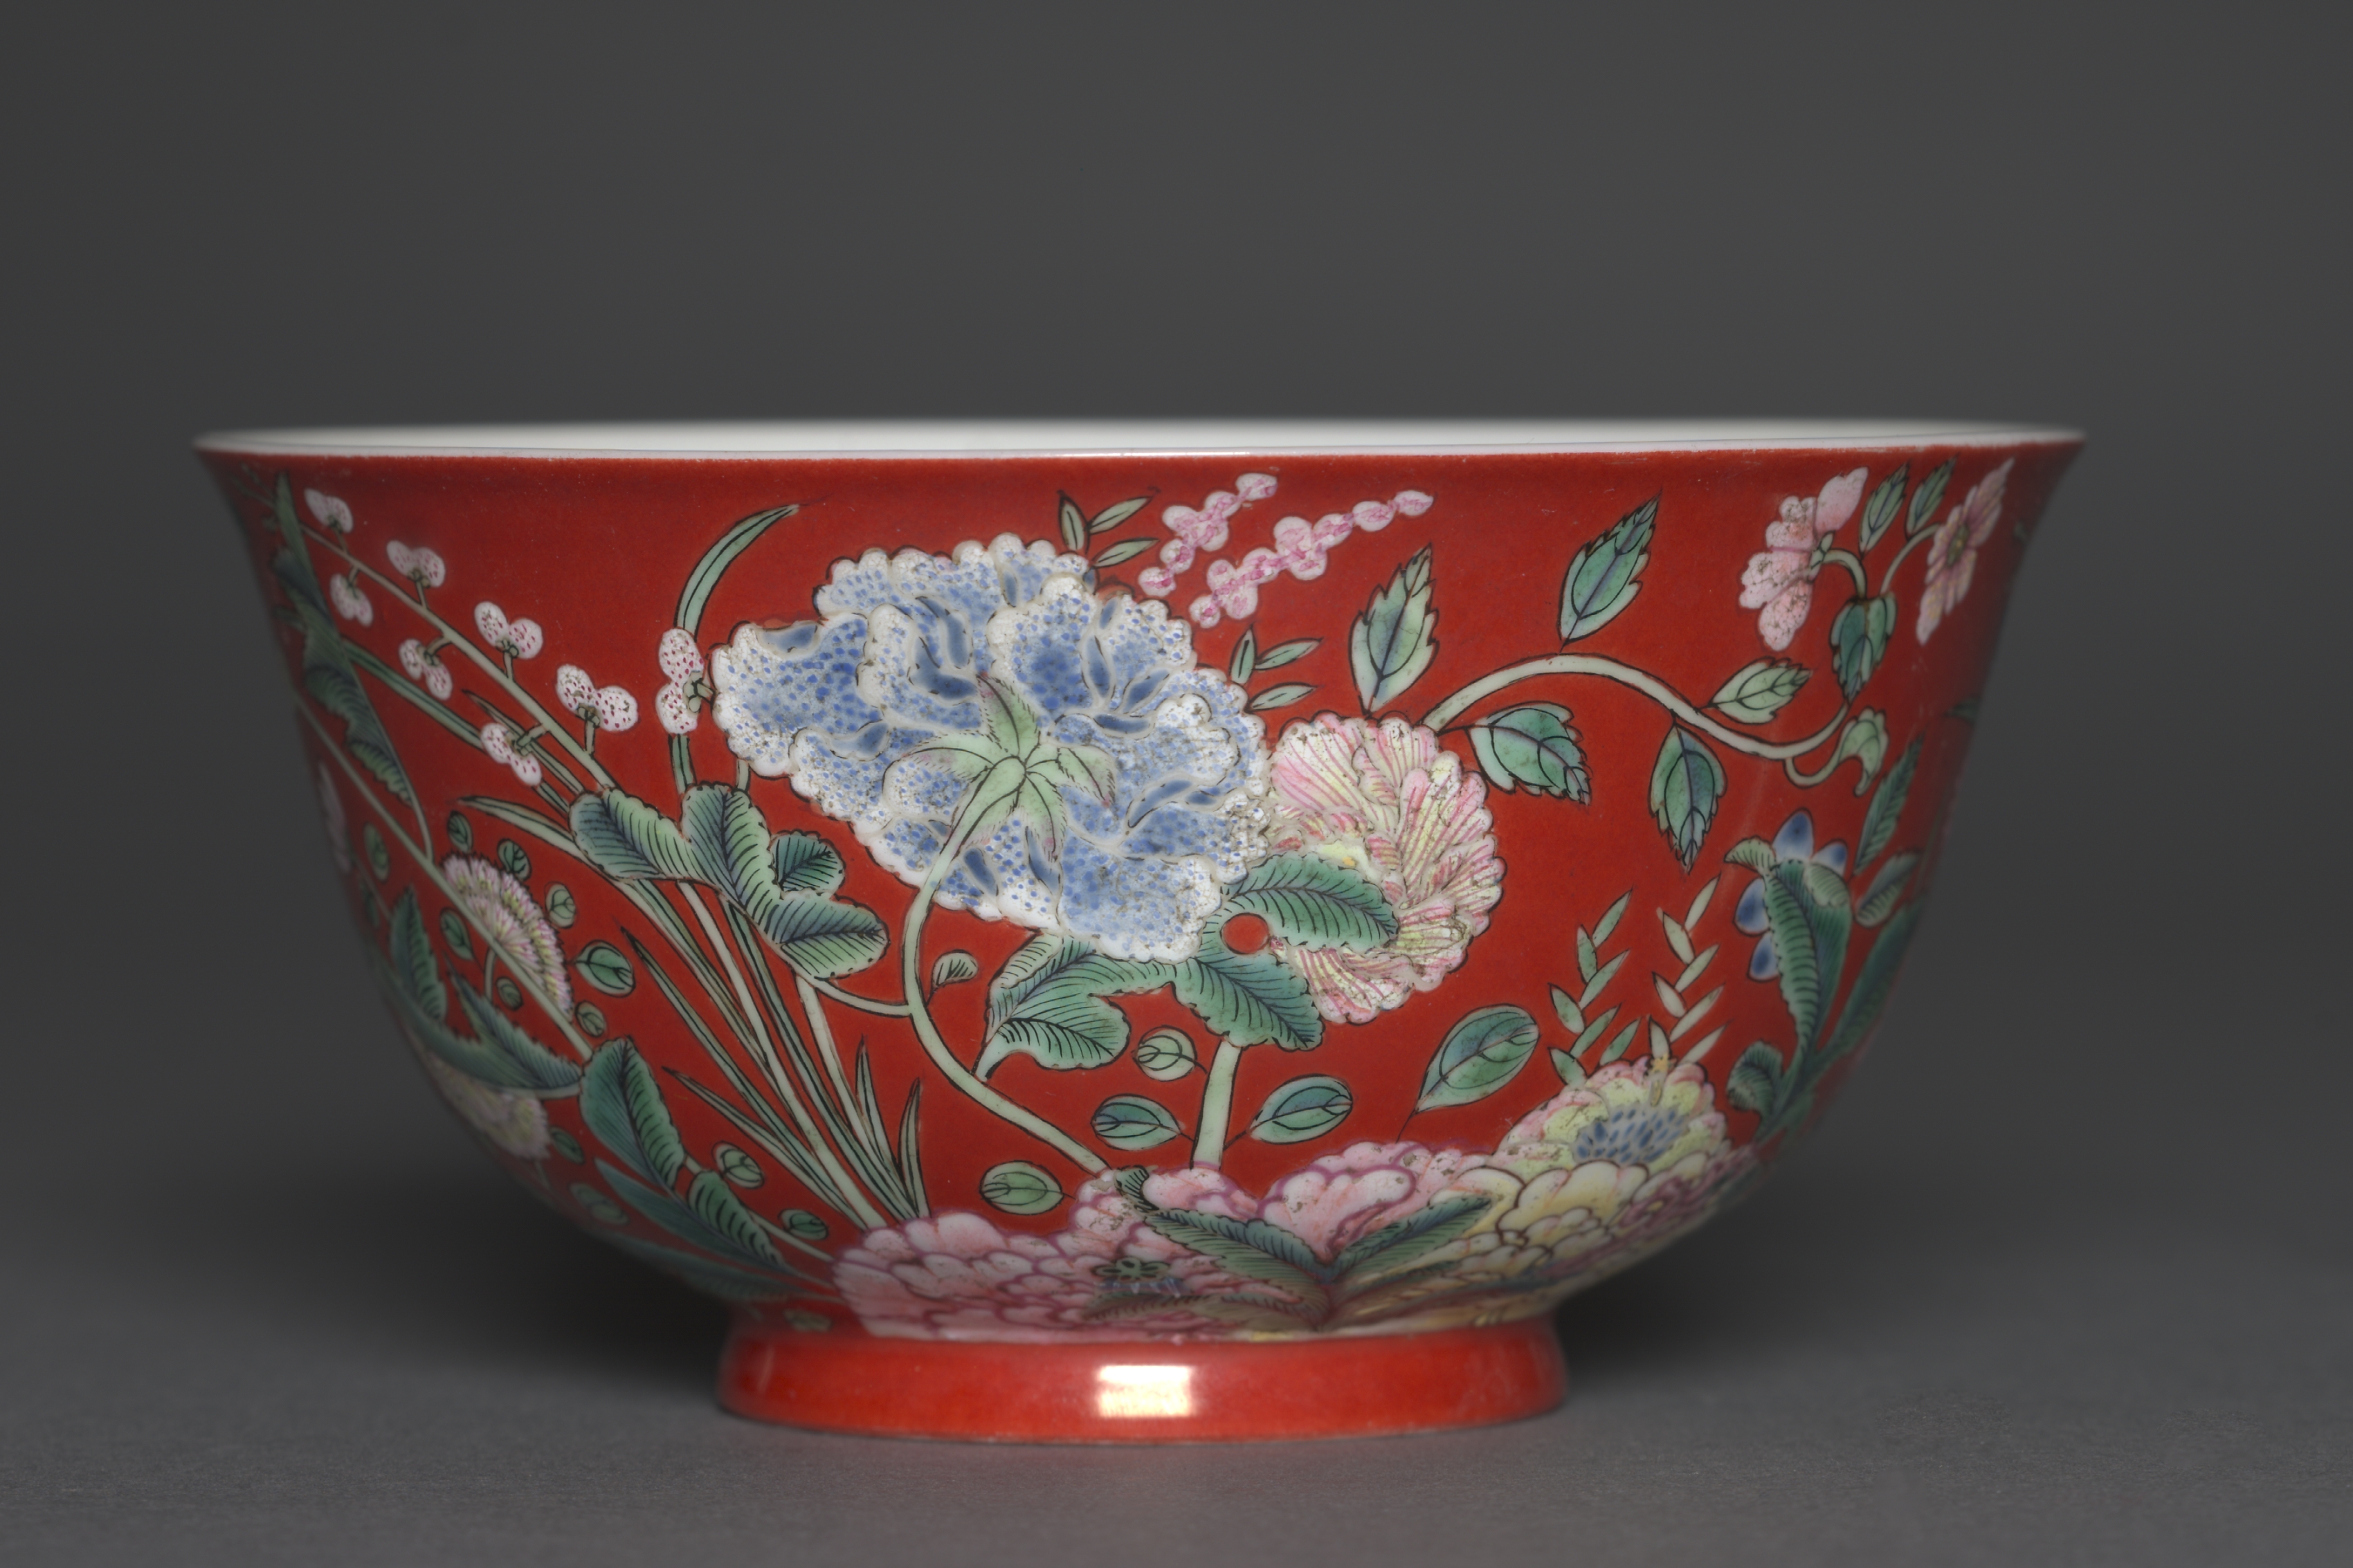 Bowl with Flowering Plants